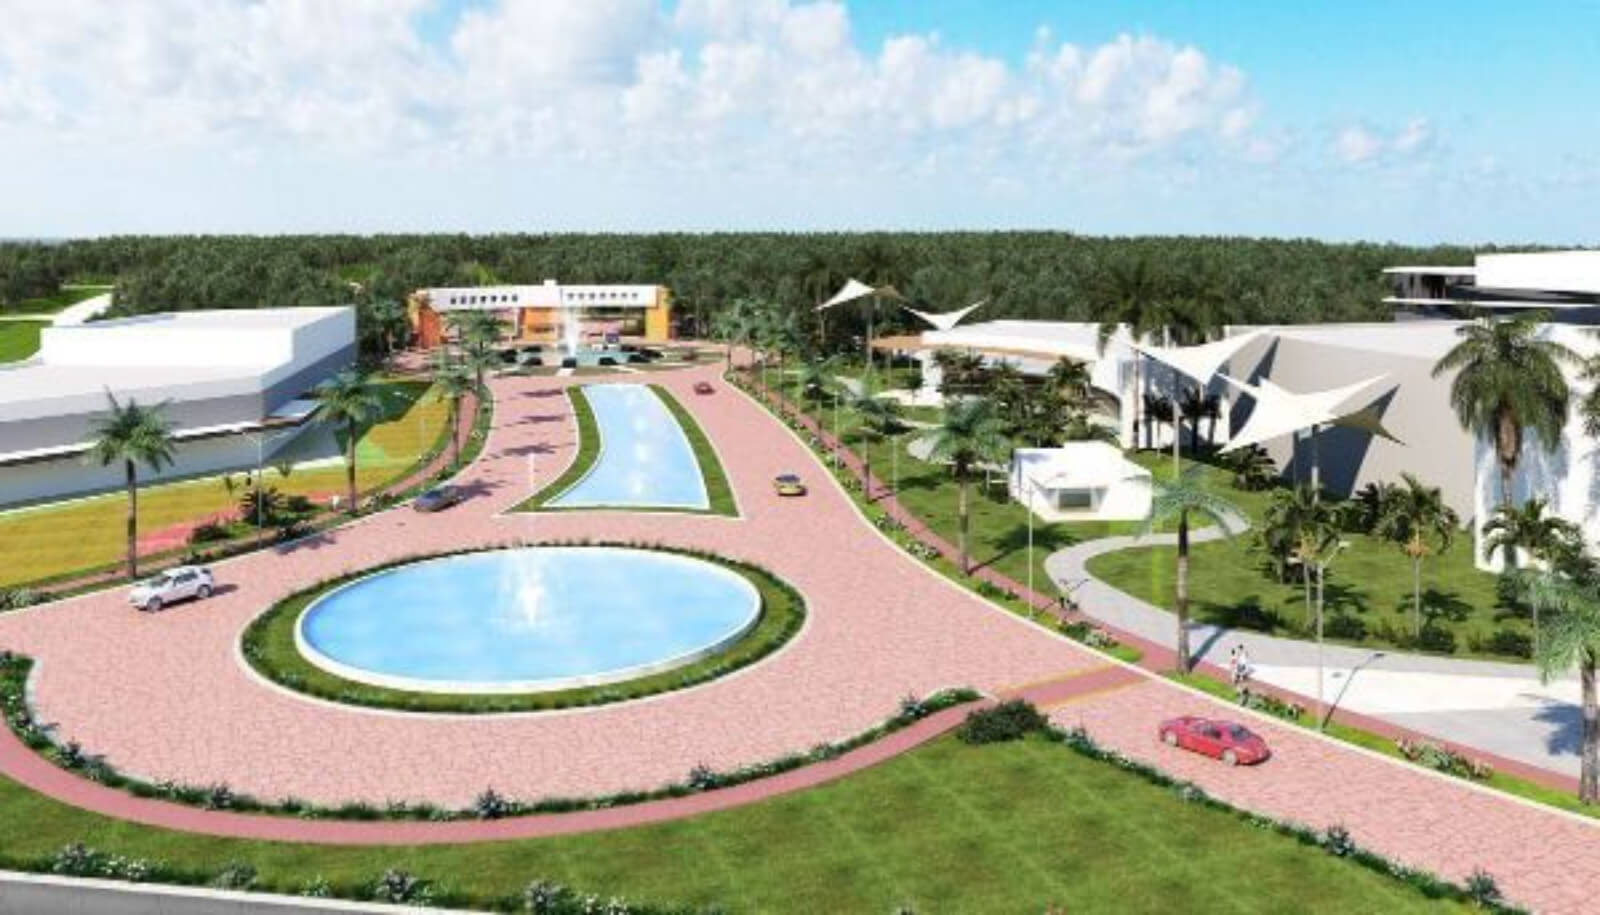 Apartment with a 25 m2 terrace, family pool and adult pool, dog area, gym, spa, and more, in pre-construction, for sale Cancun.